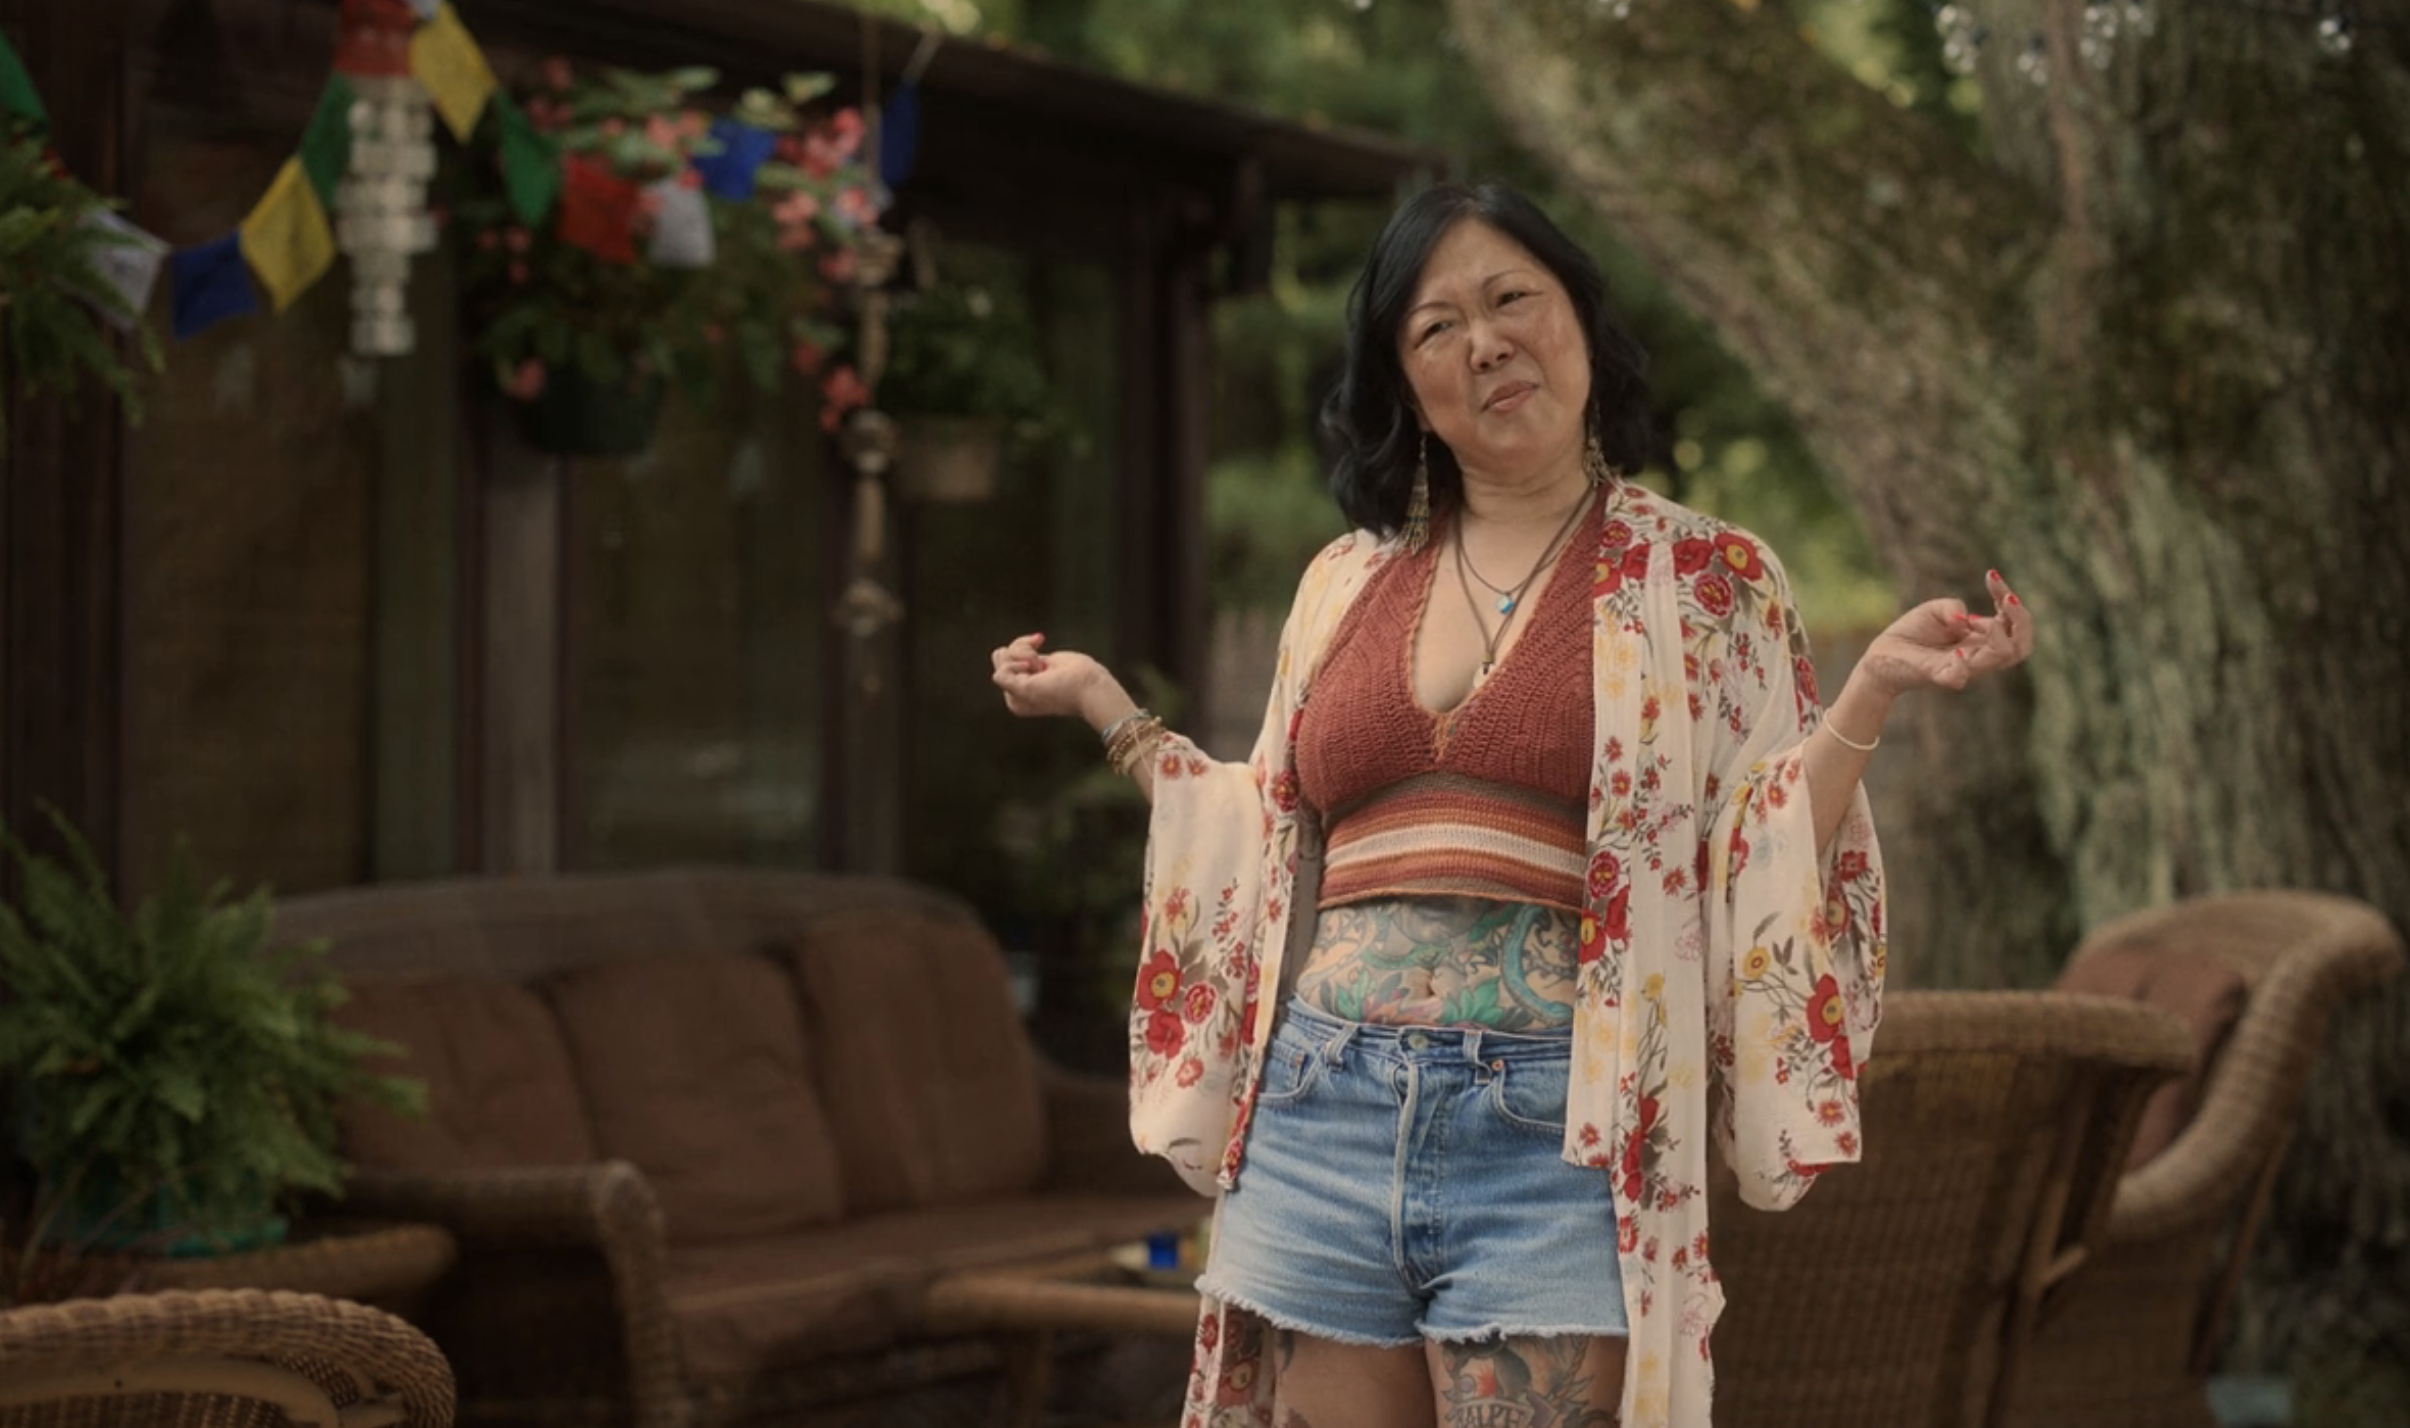 Cho in denim shorts and halter top and shawl